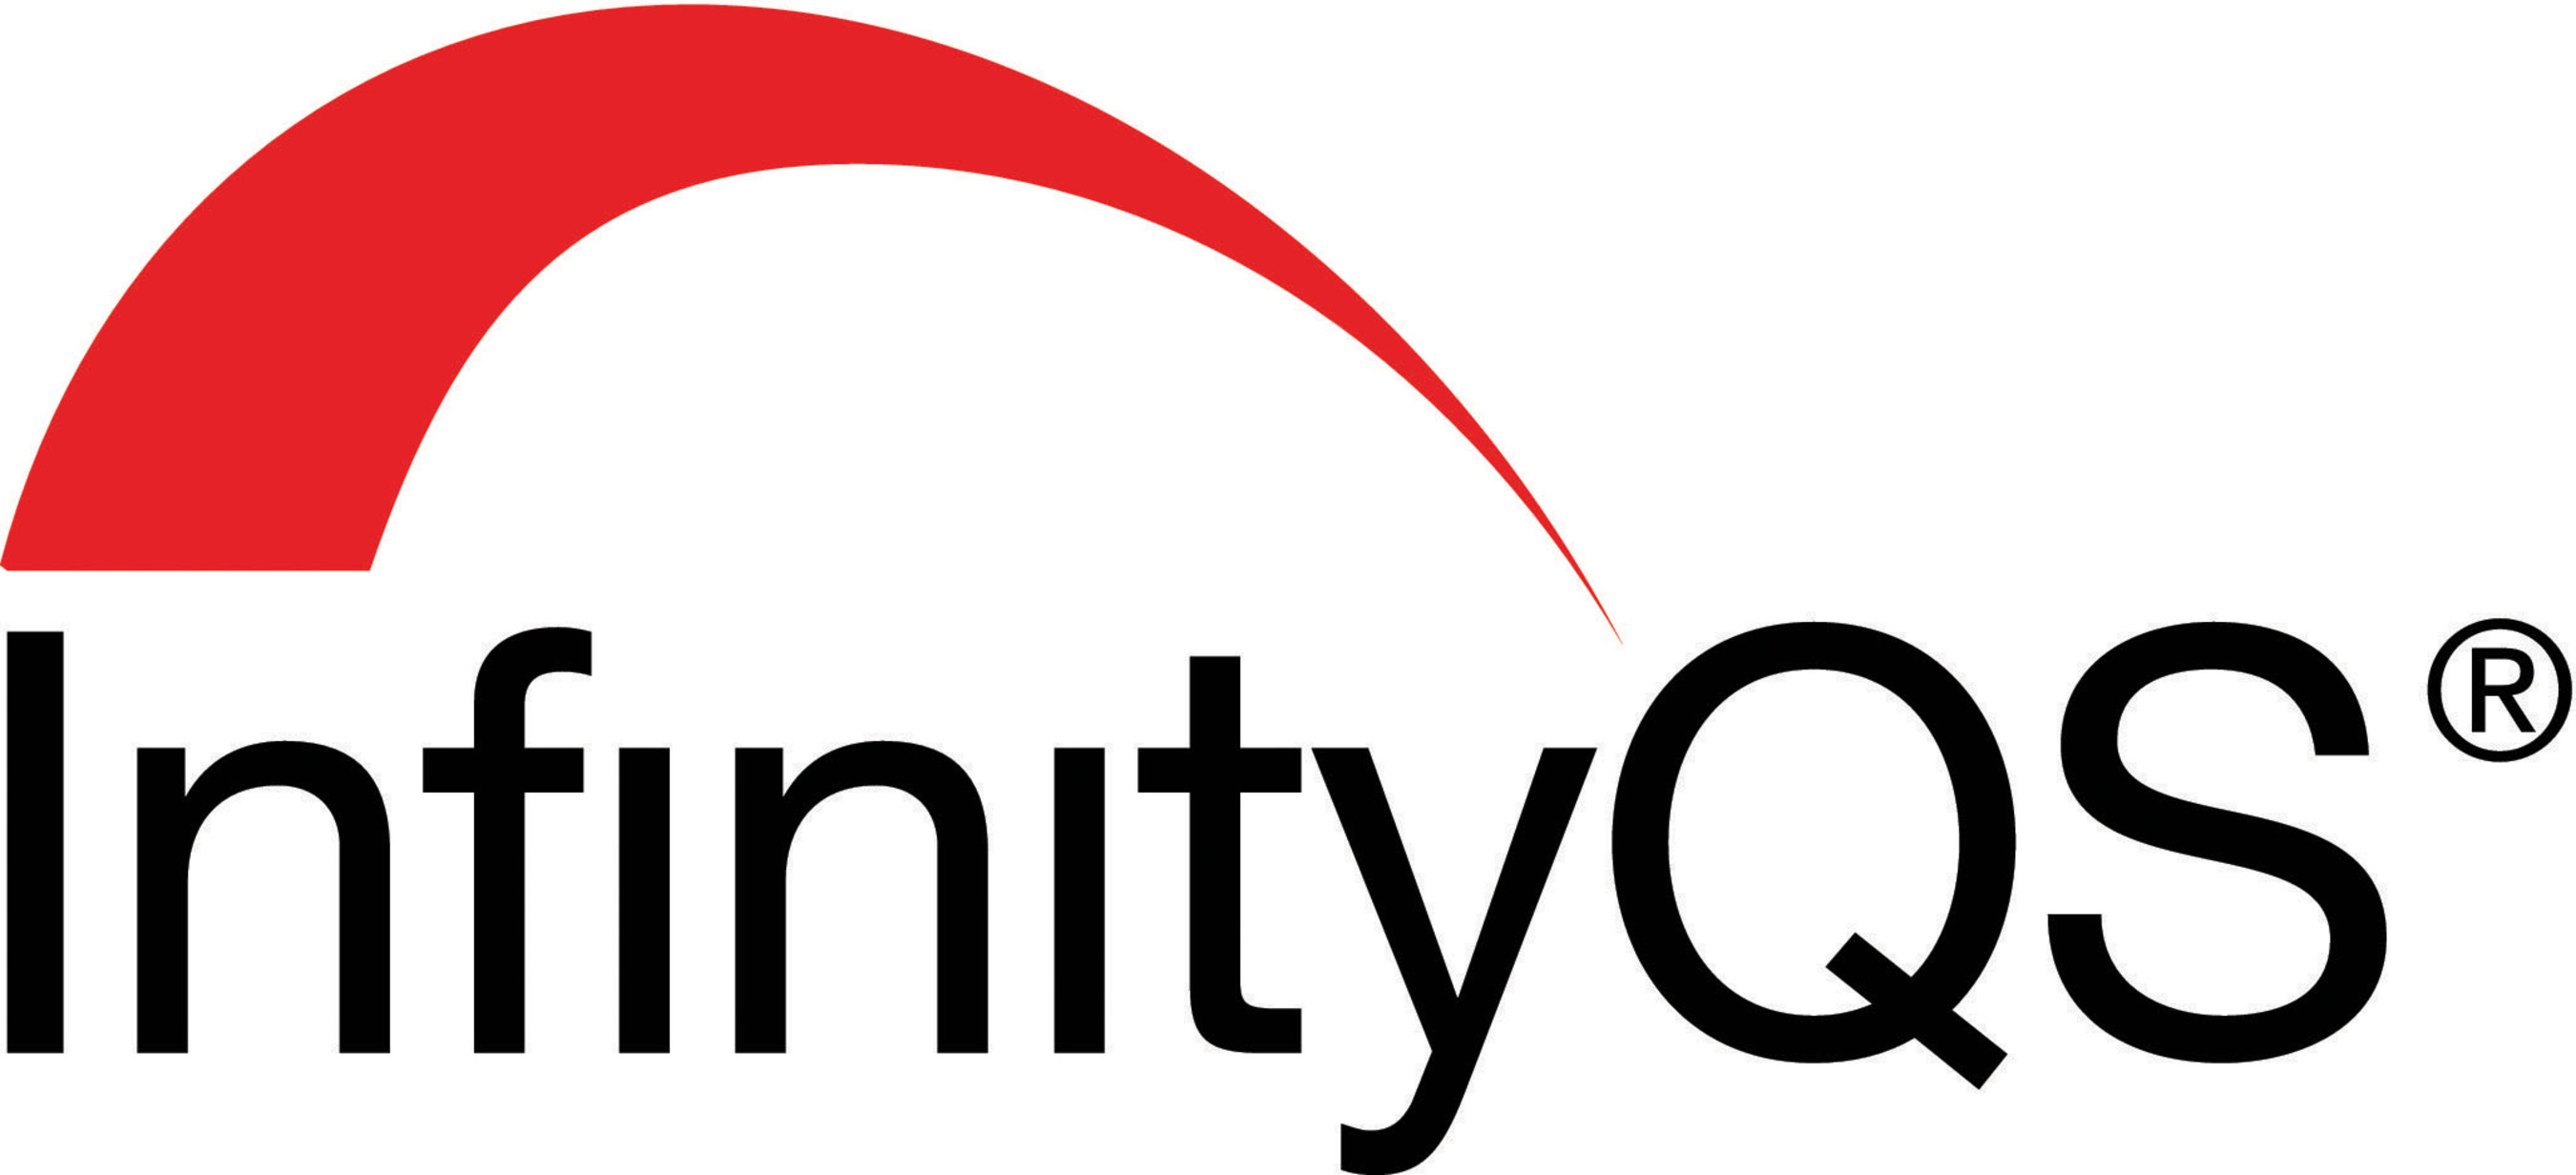 InfinityQS is the global authority on Manufacturing Intelligence and enterprise quality, servicing more than 40,000 active licenses with over 2,500 of the world's top manufacturers. For more information, visit www.infinityqs.com.